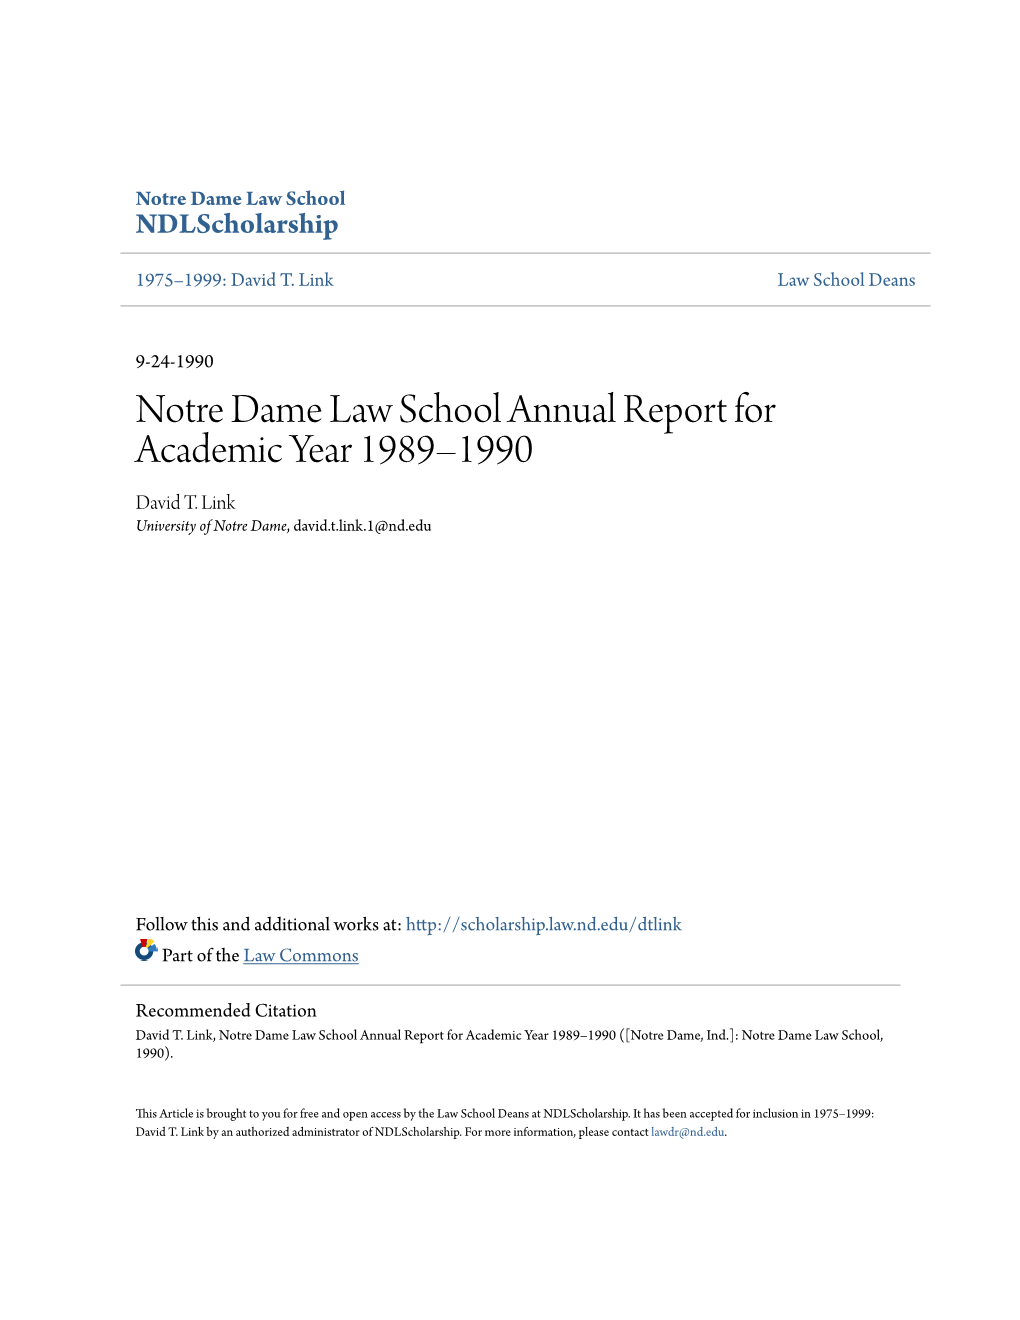 Notre Dame Law School Annual Report for Academic Year 1989Â